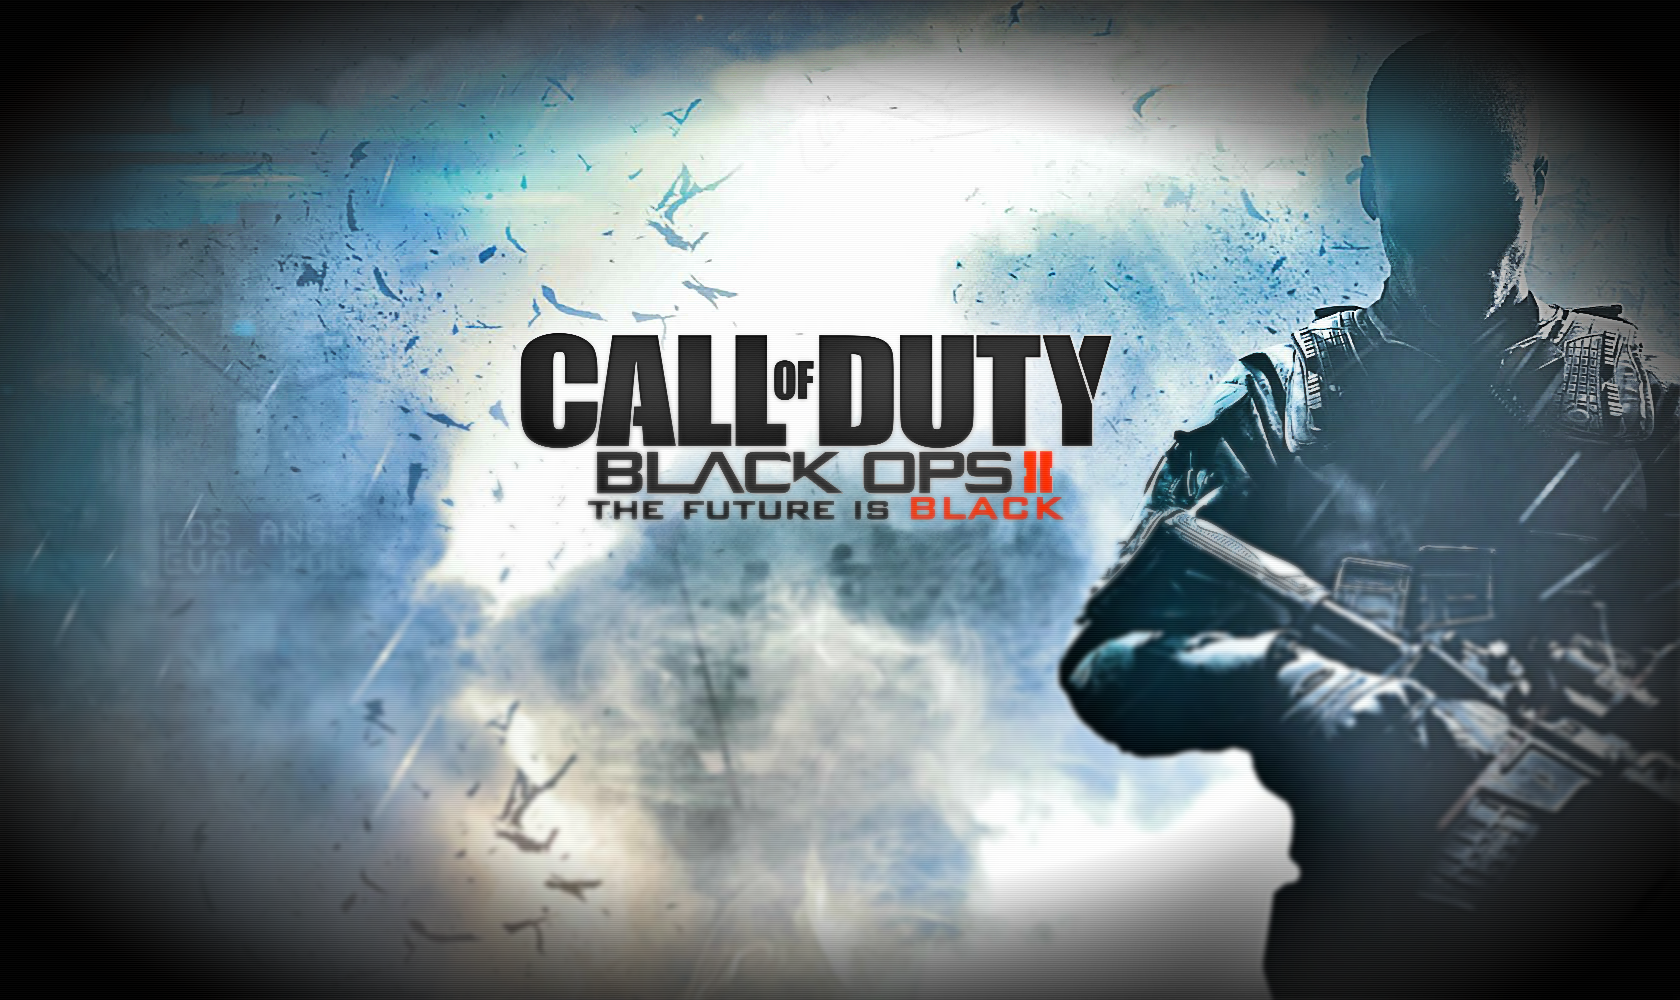 Black Ops 2 Wallpaper for Download 1680x1000